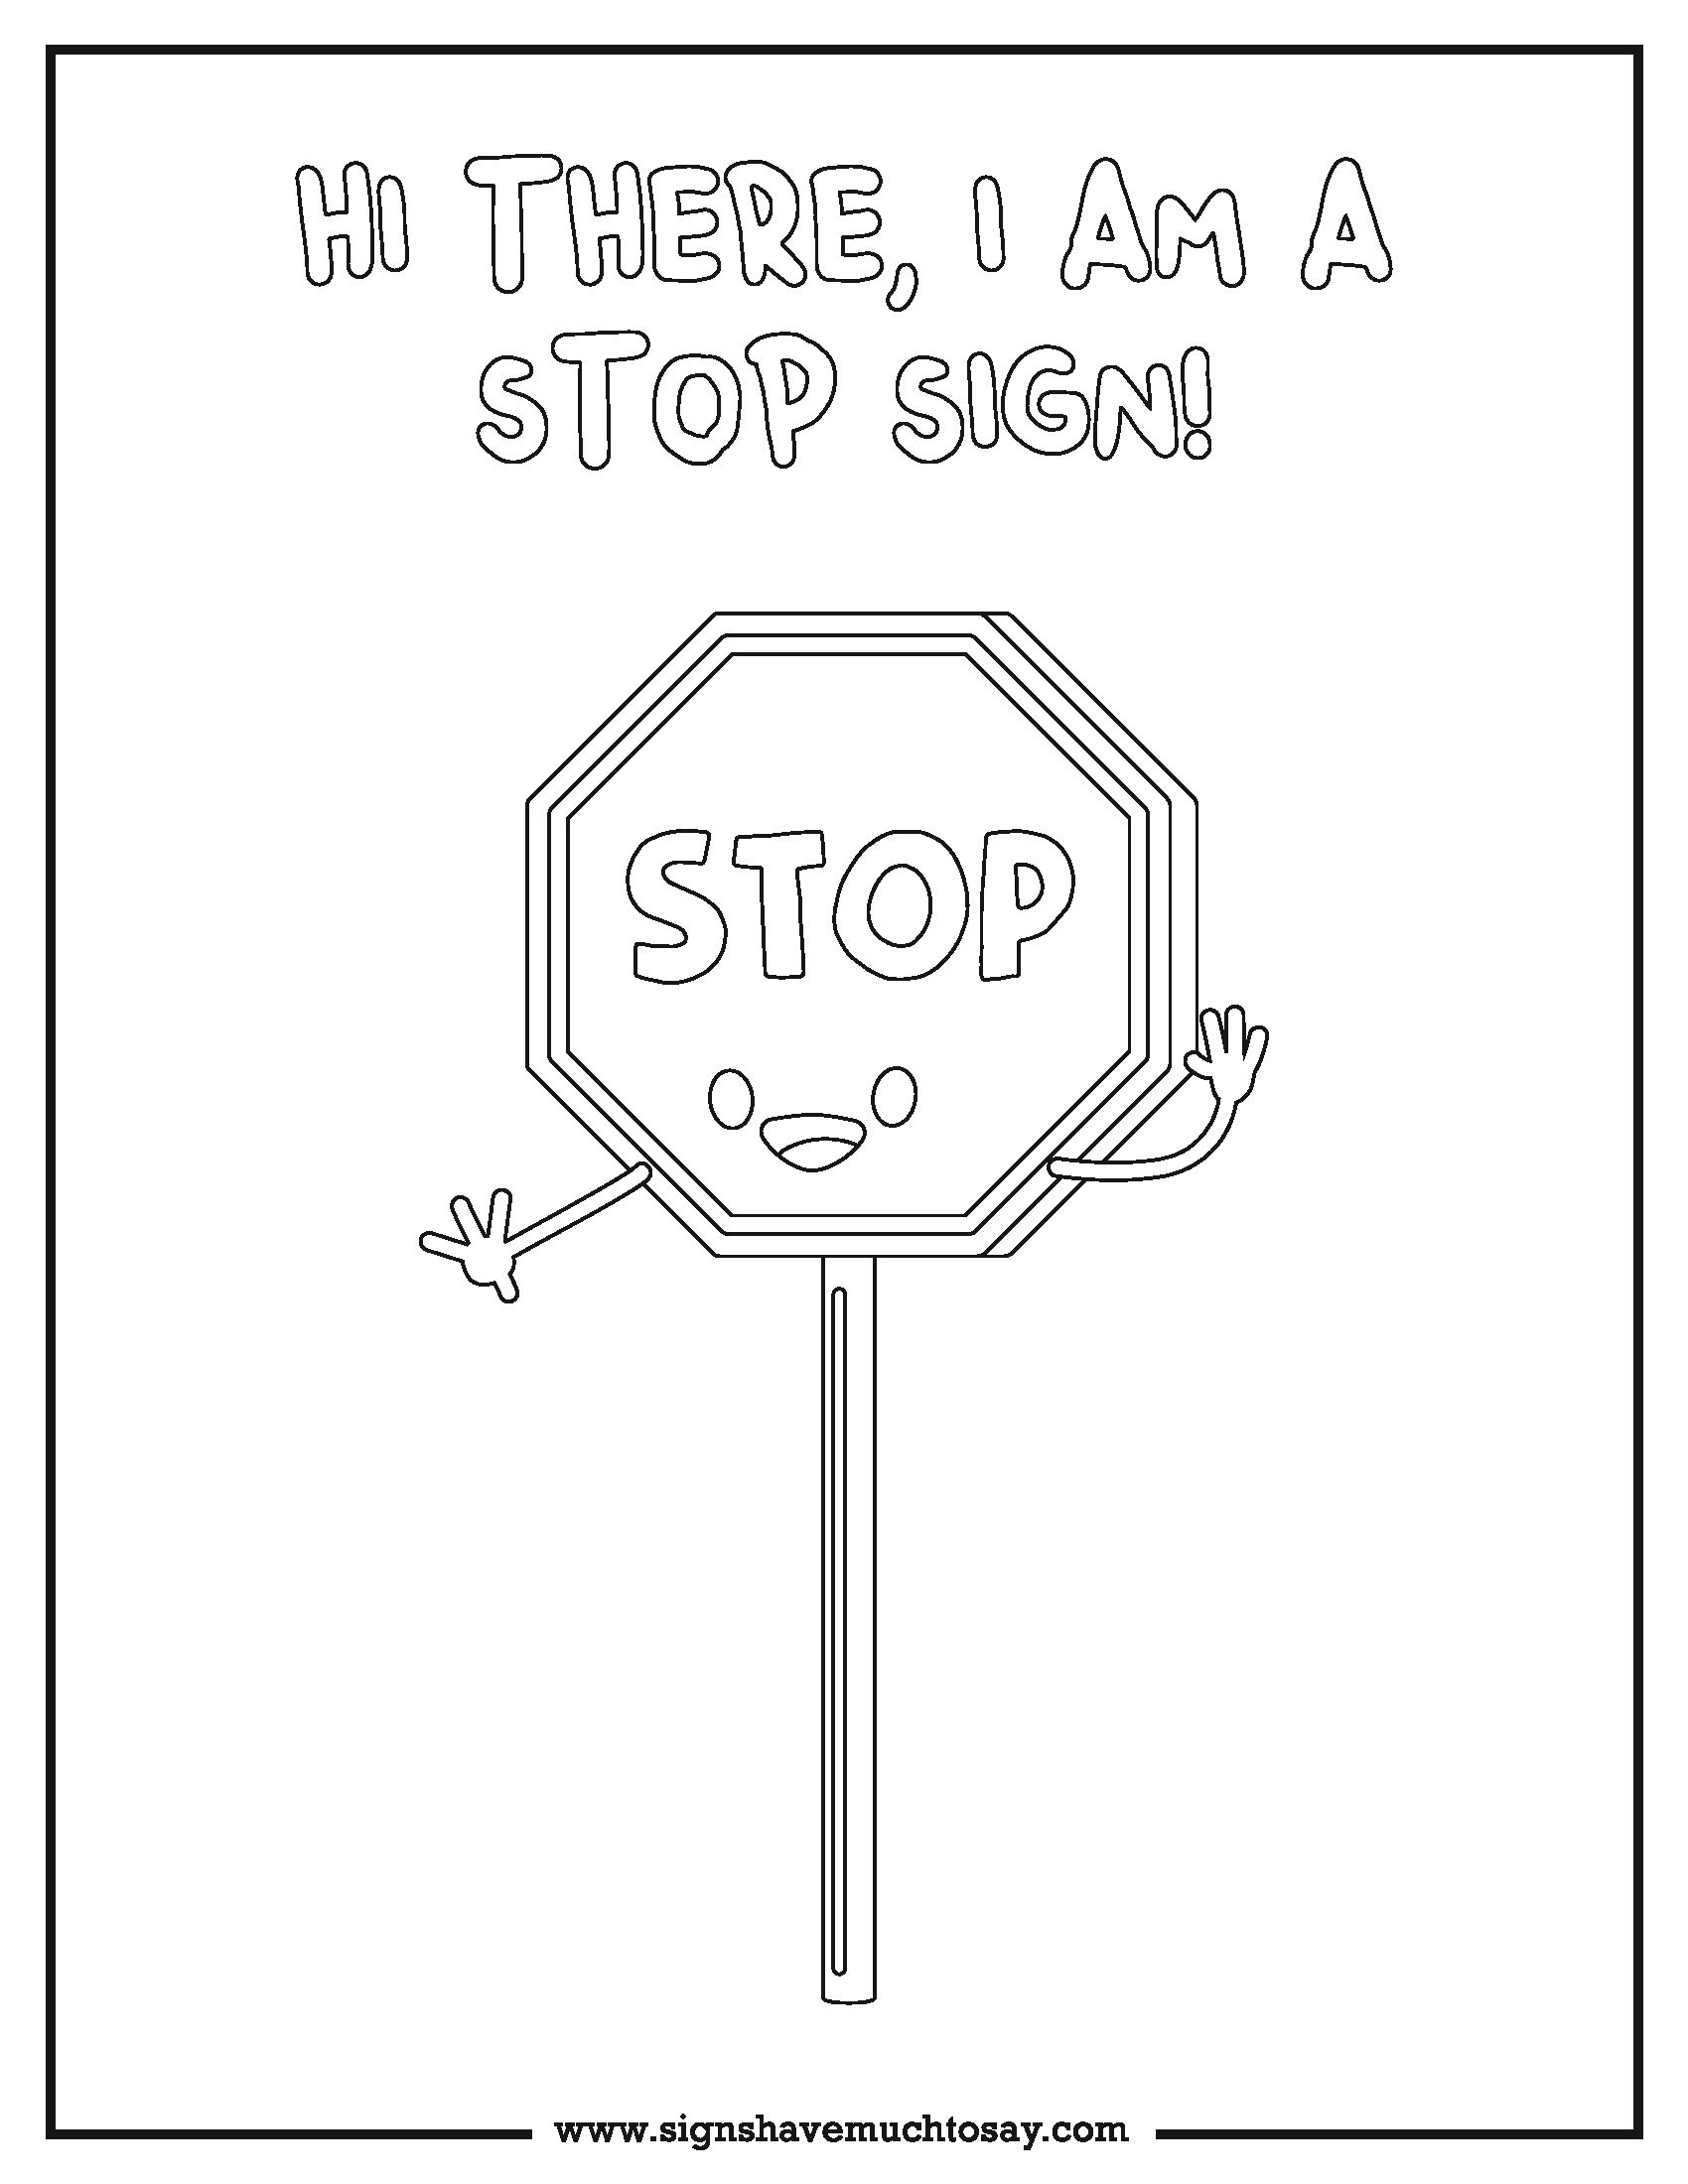 Coloring sheets â signs have much to say